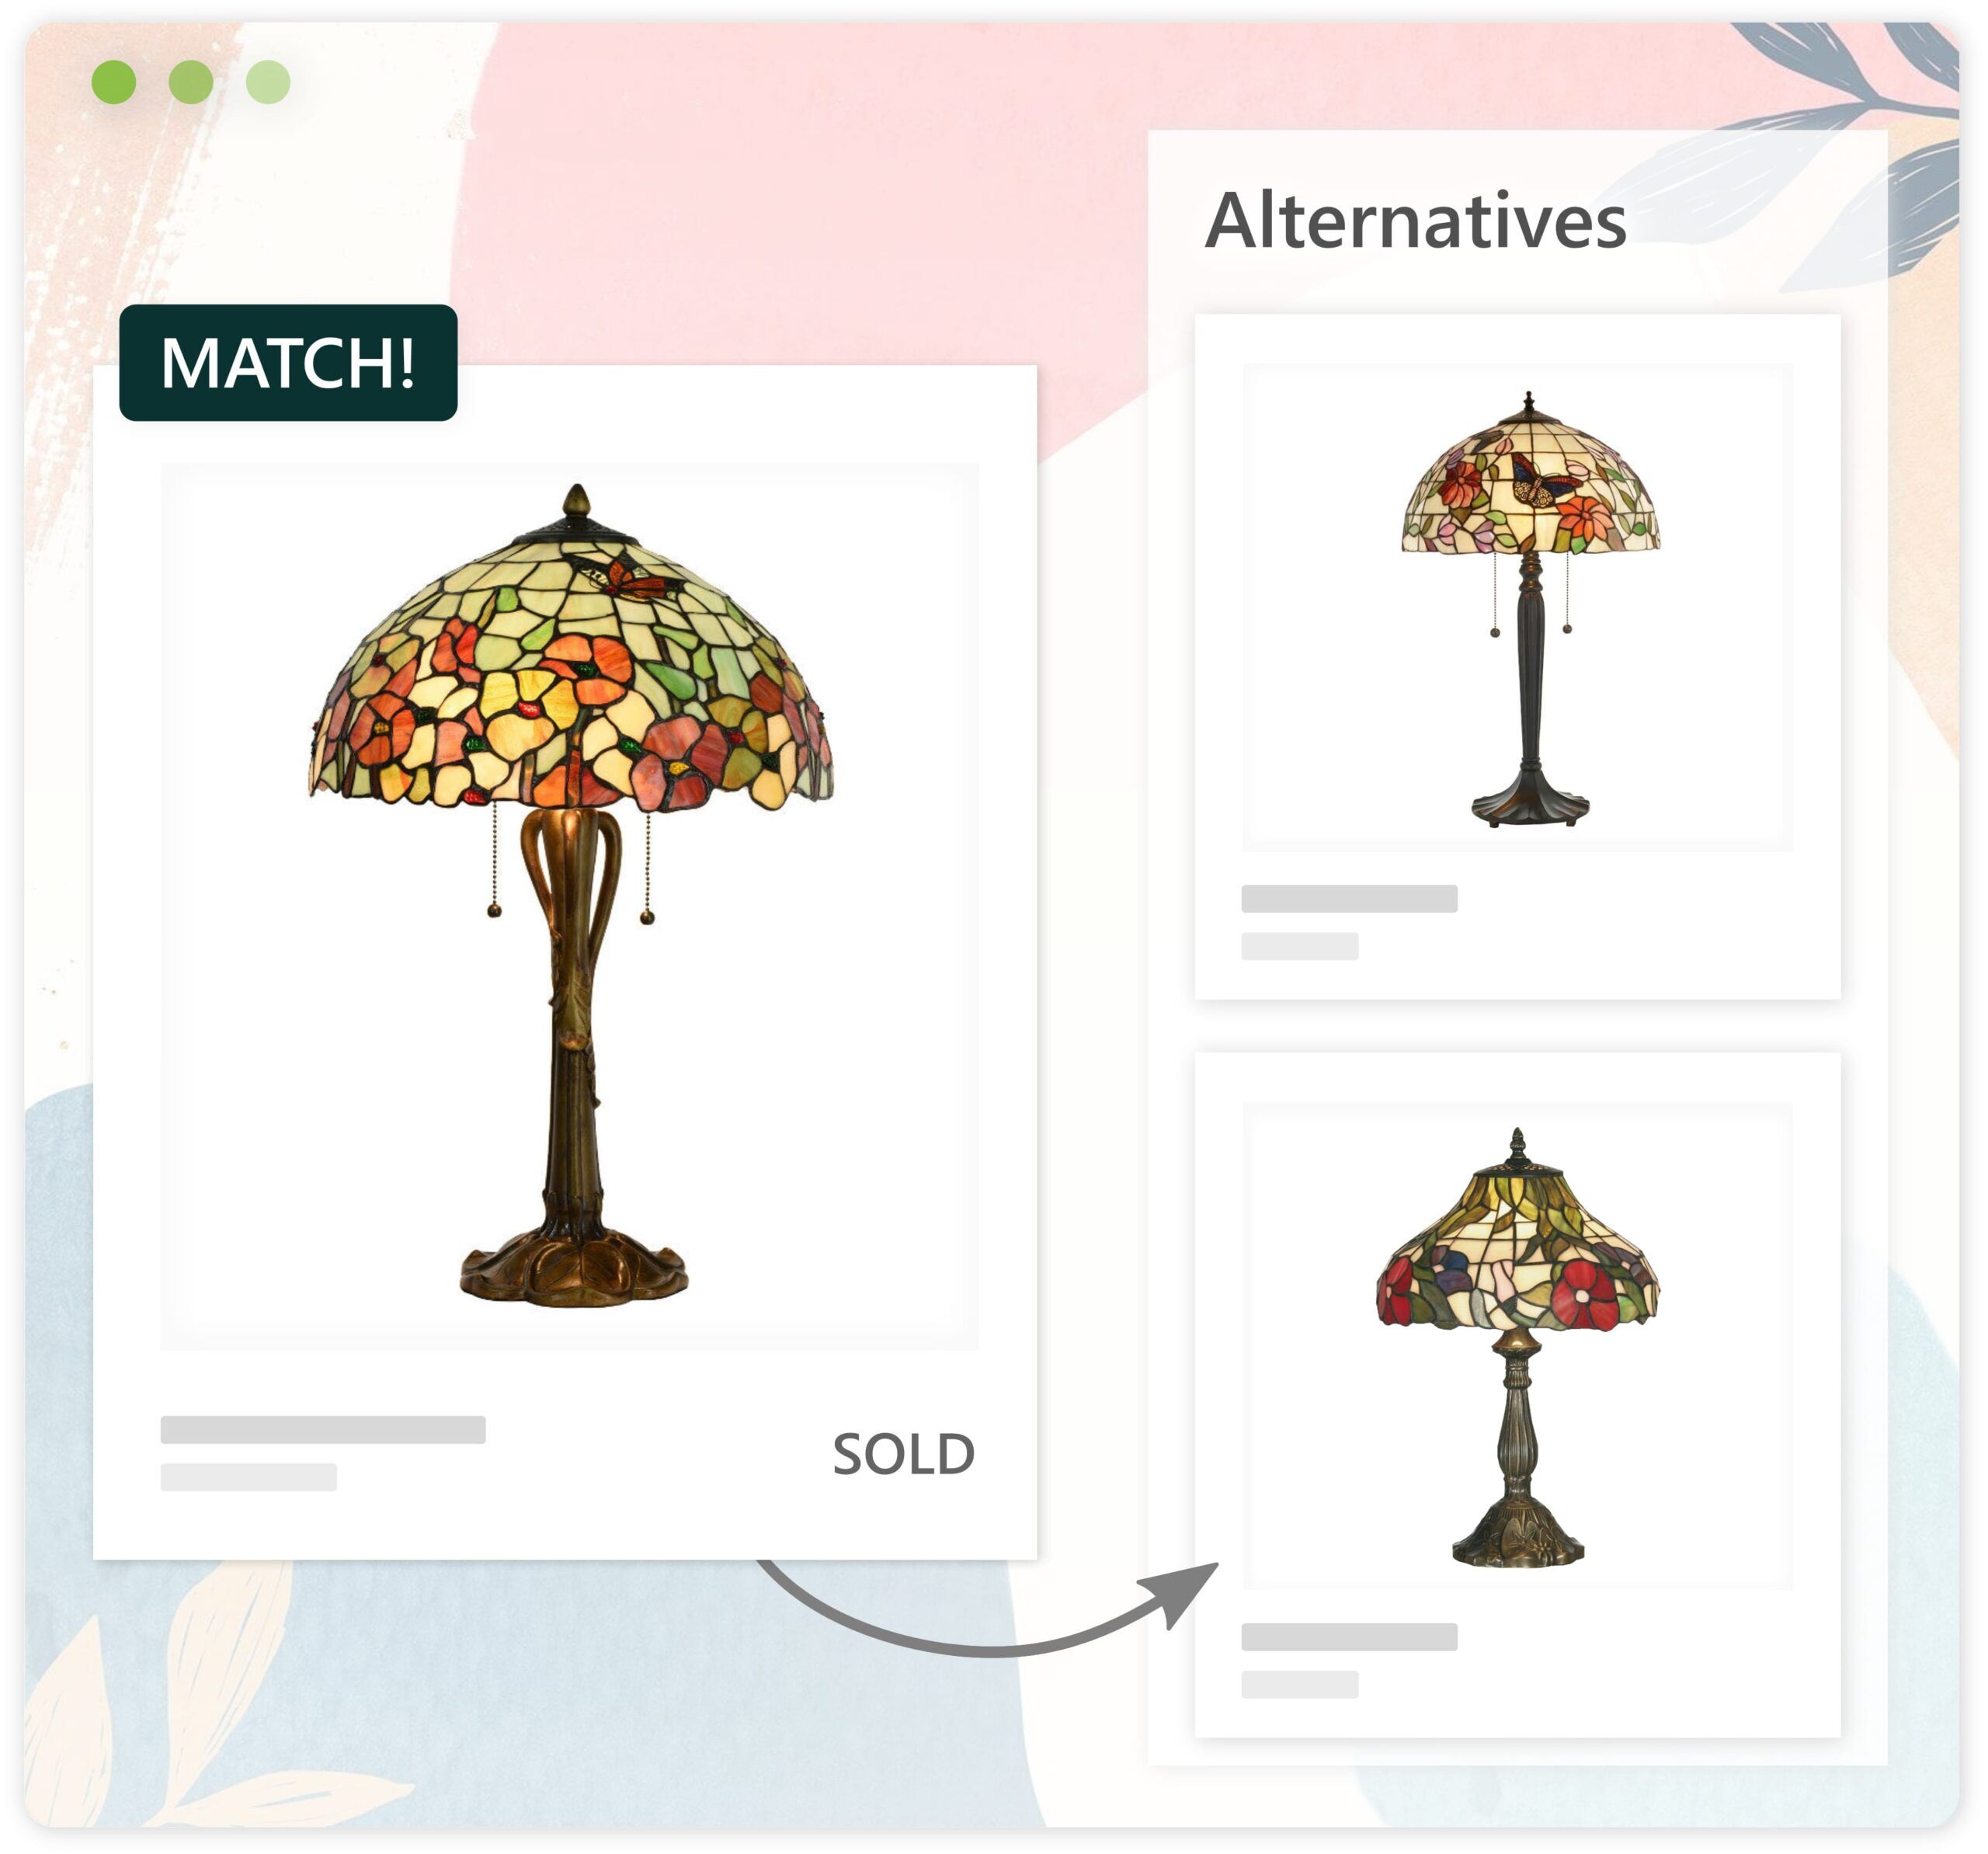 Similarity search used to recommend alternatives to out-of-stock products